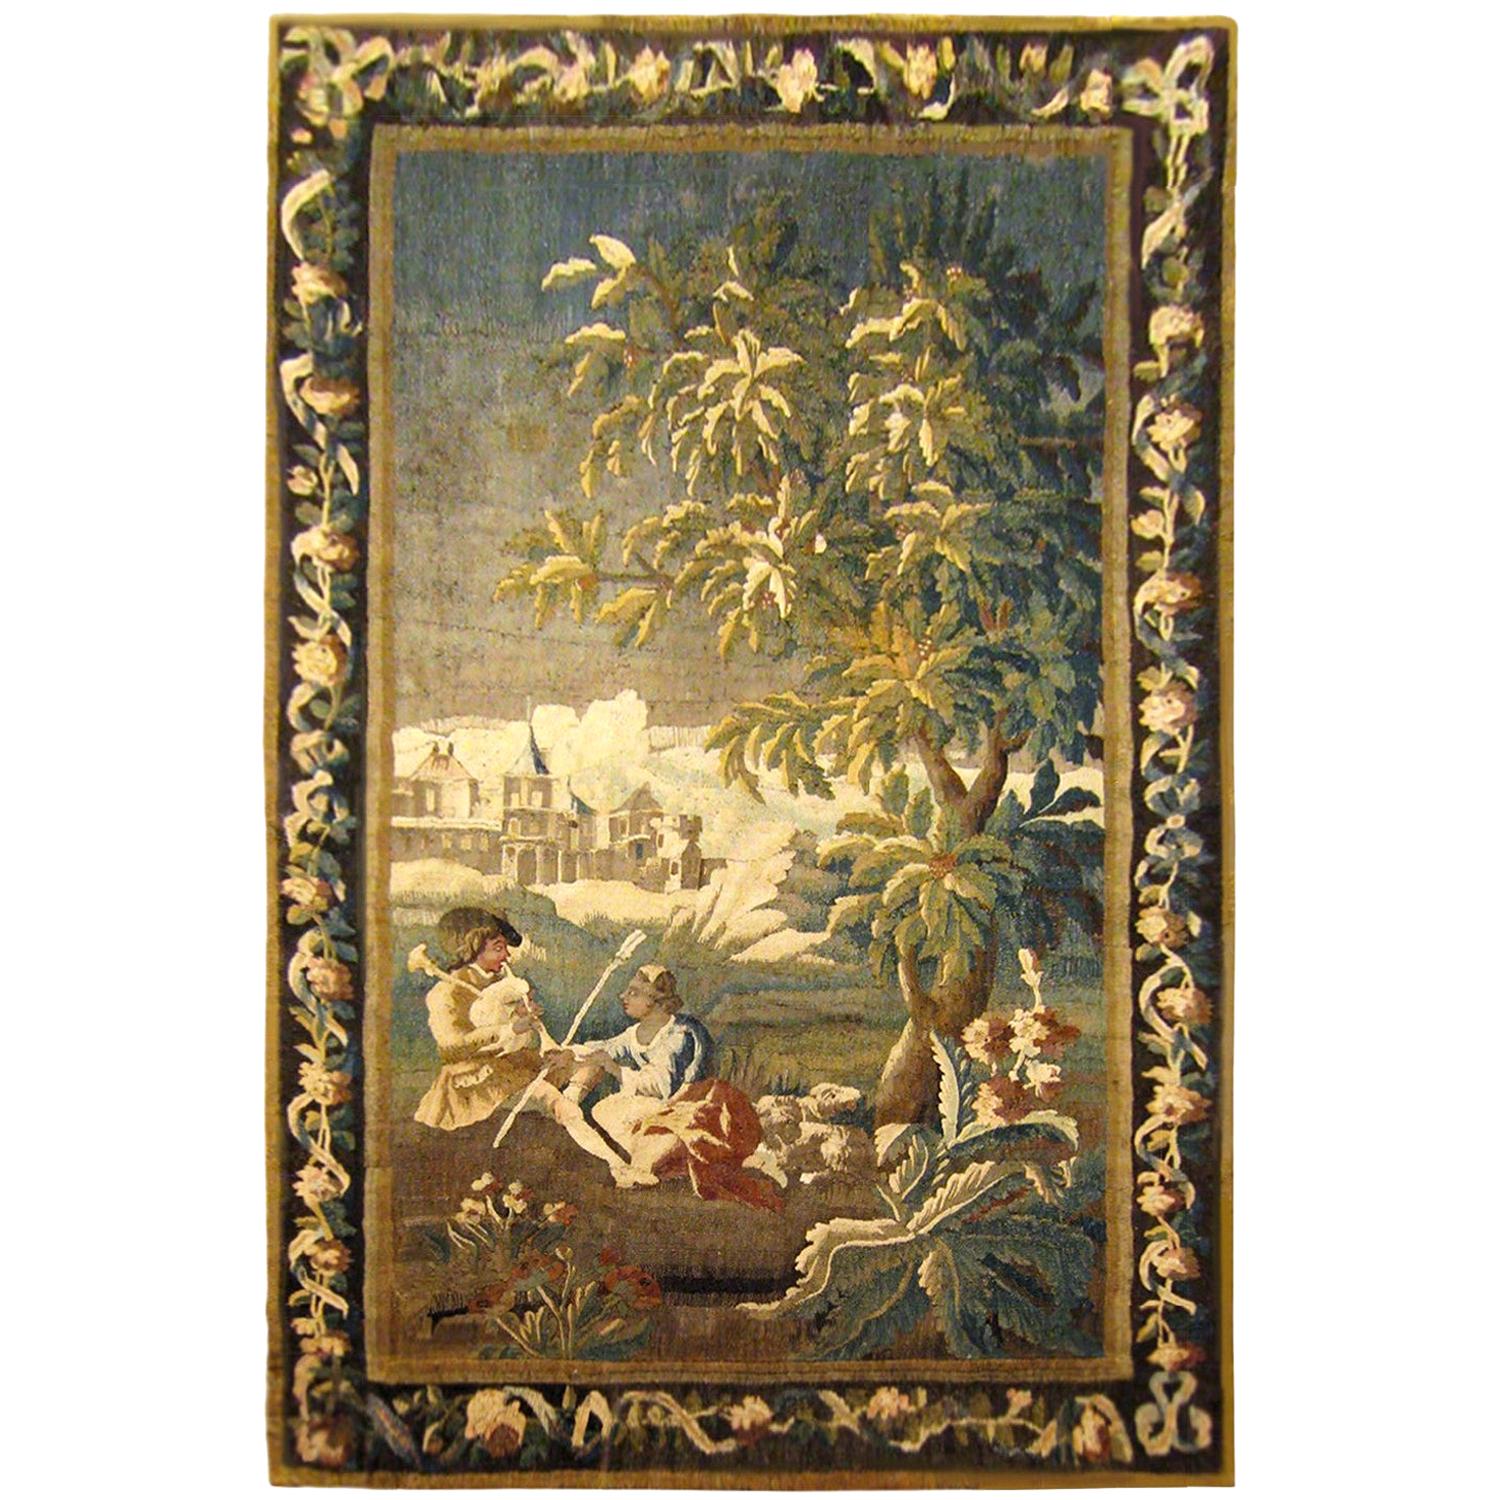 18th Cent. French Felletin Pastoral Tapestry, Youths Playing Music in the Wood